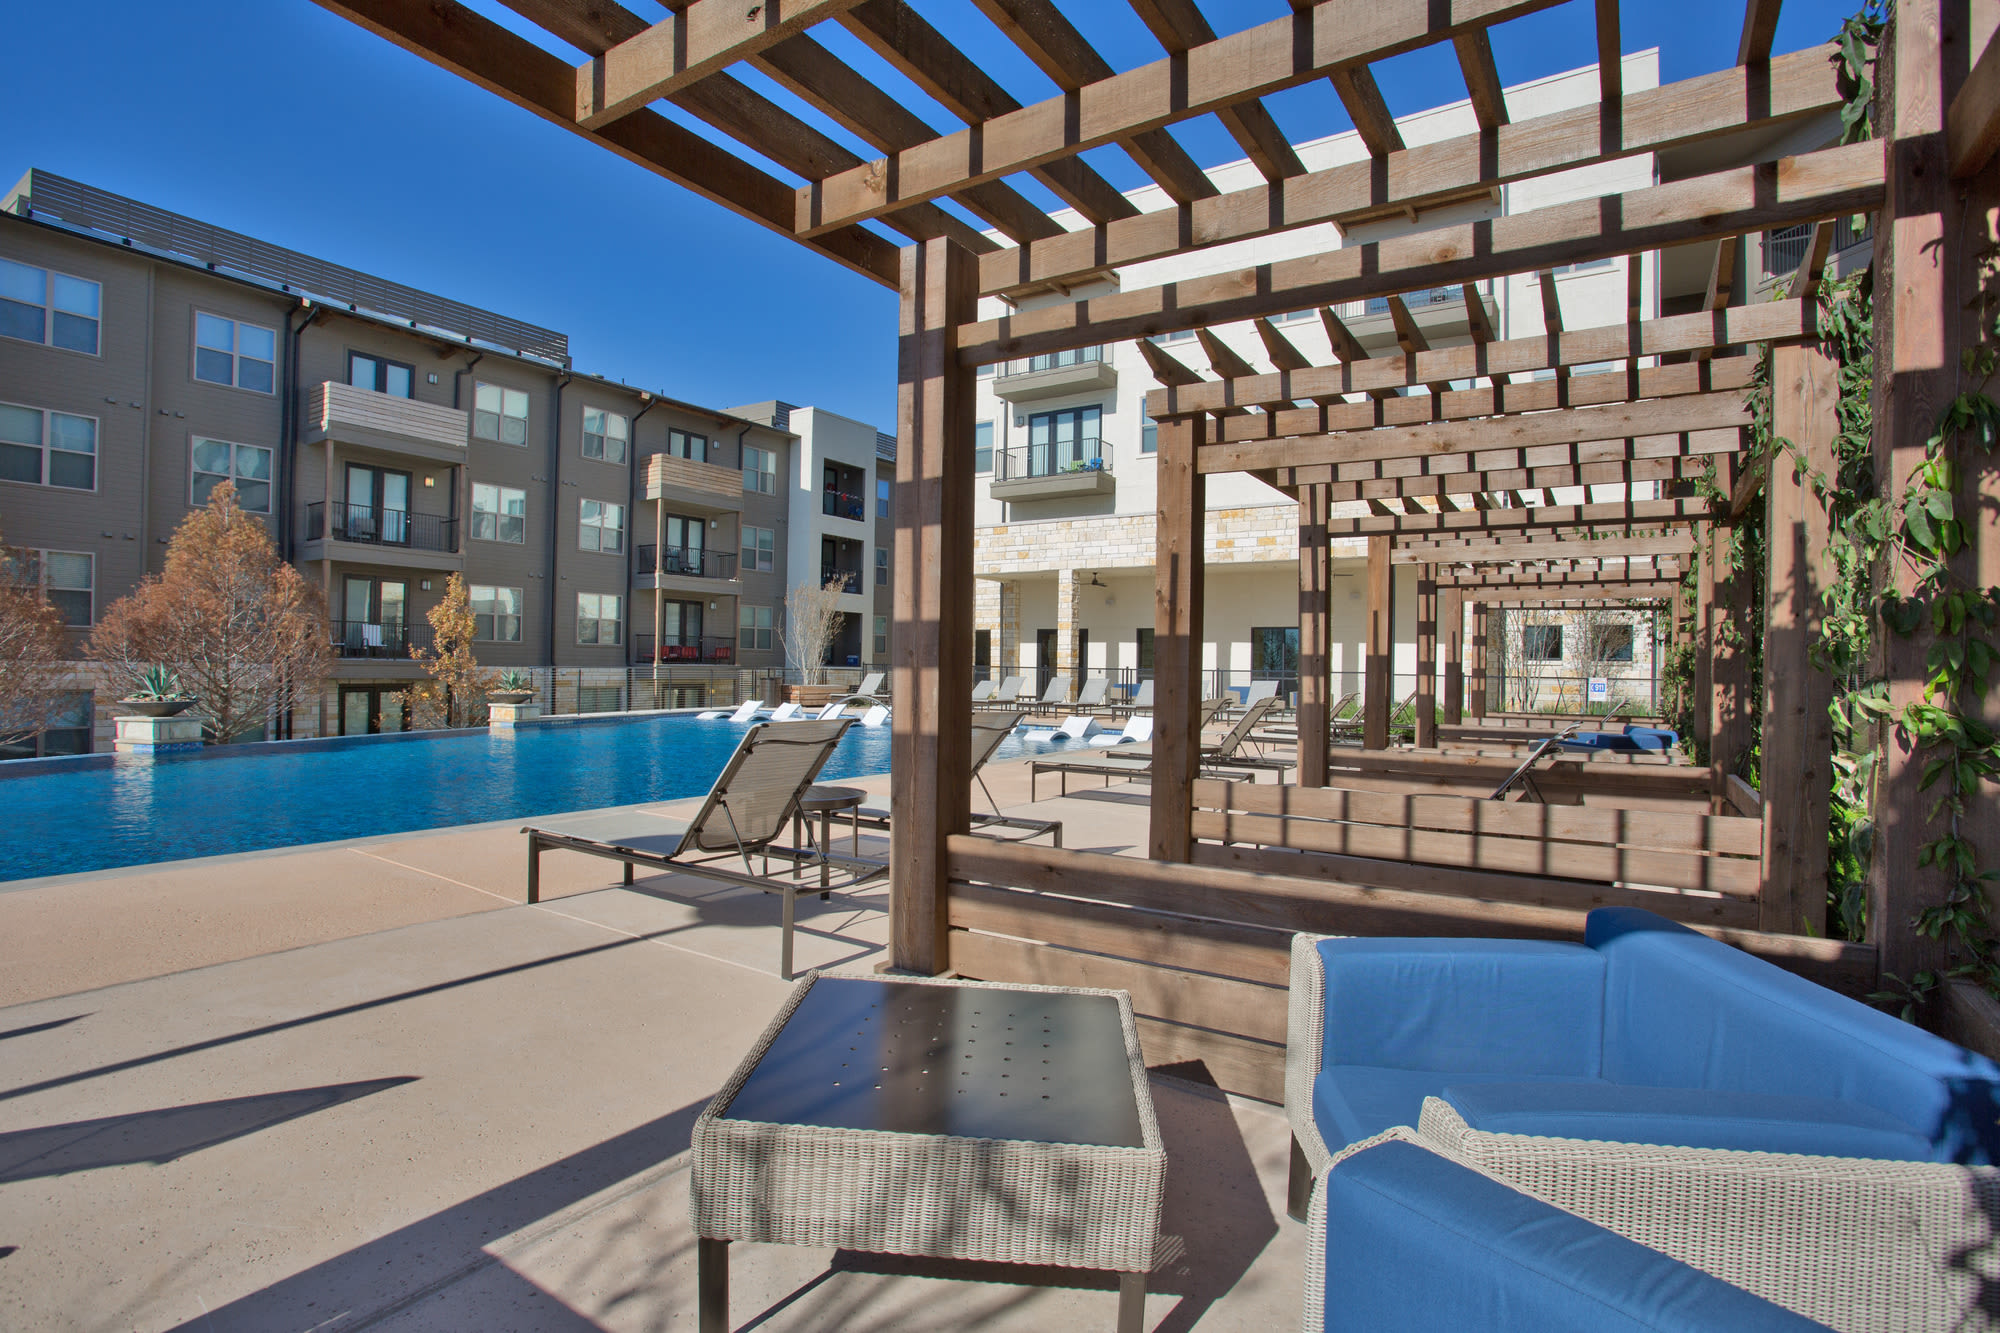 Community pool and sitting area at Henley at The Rim in San Antonio, Texas